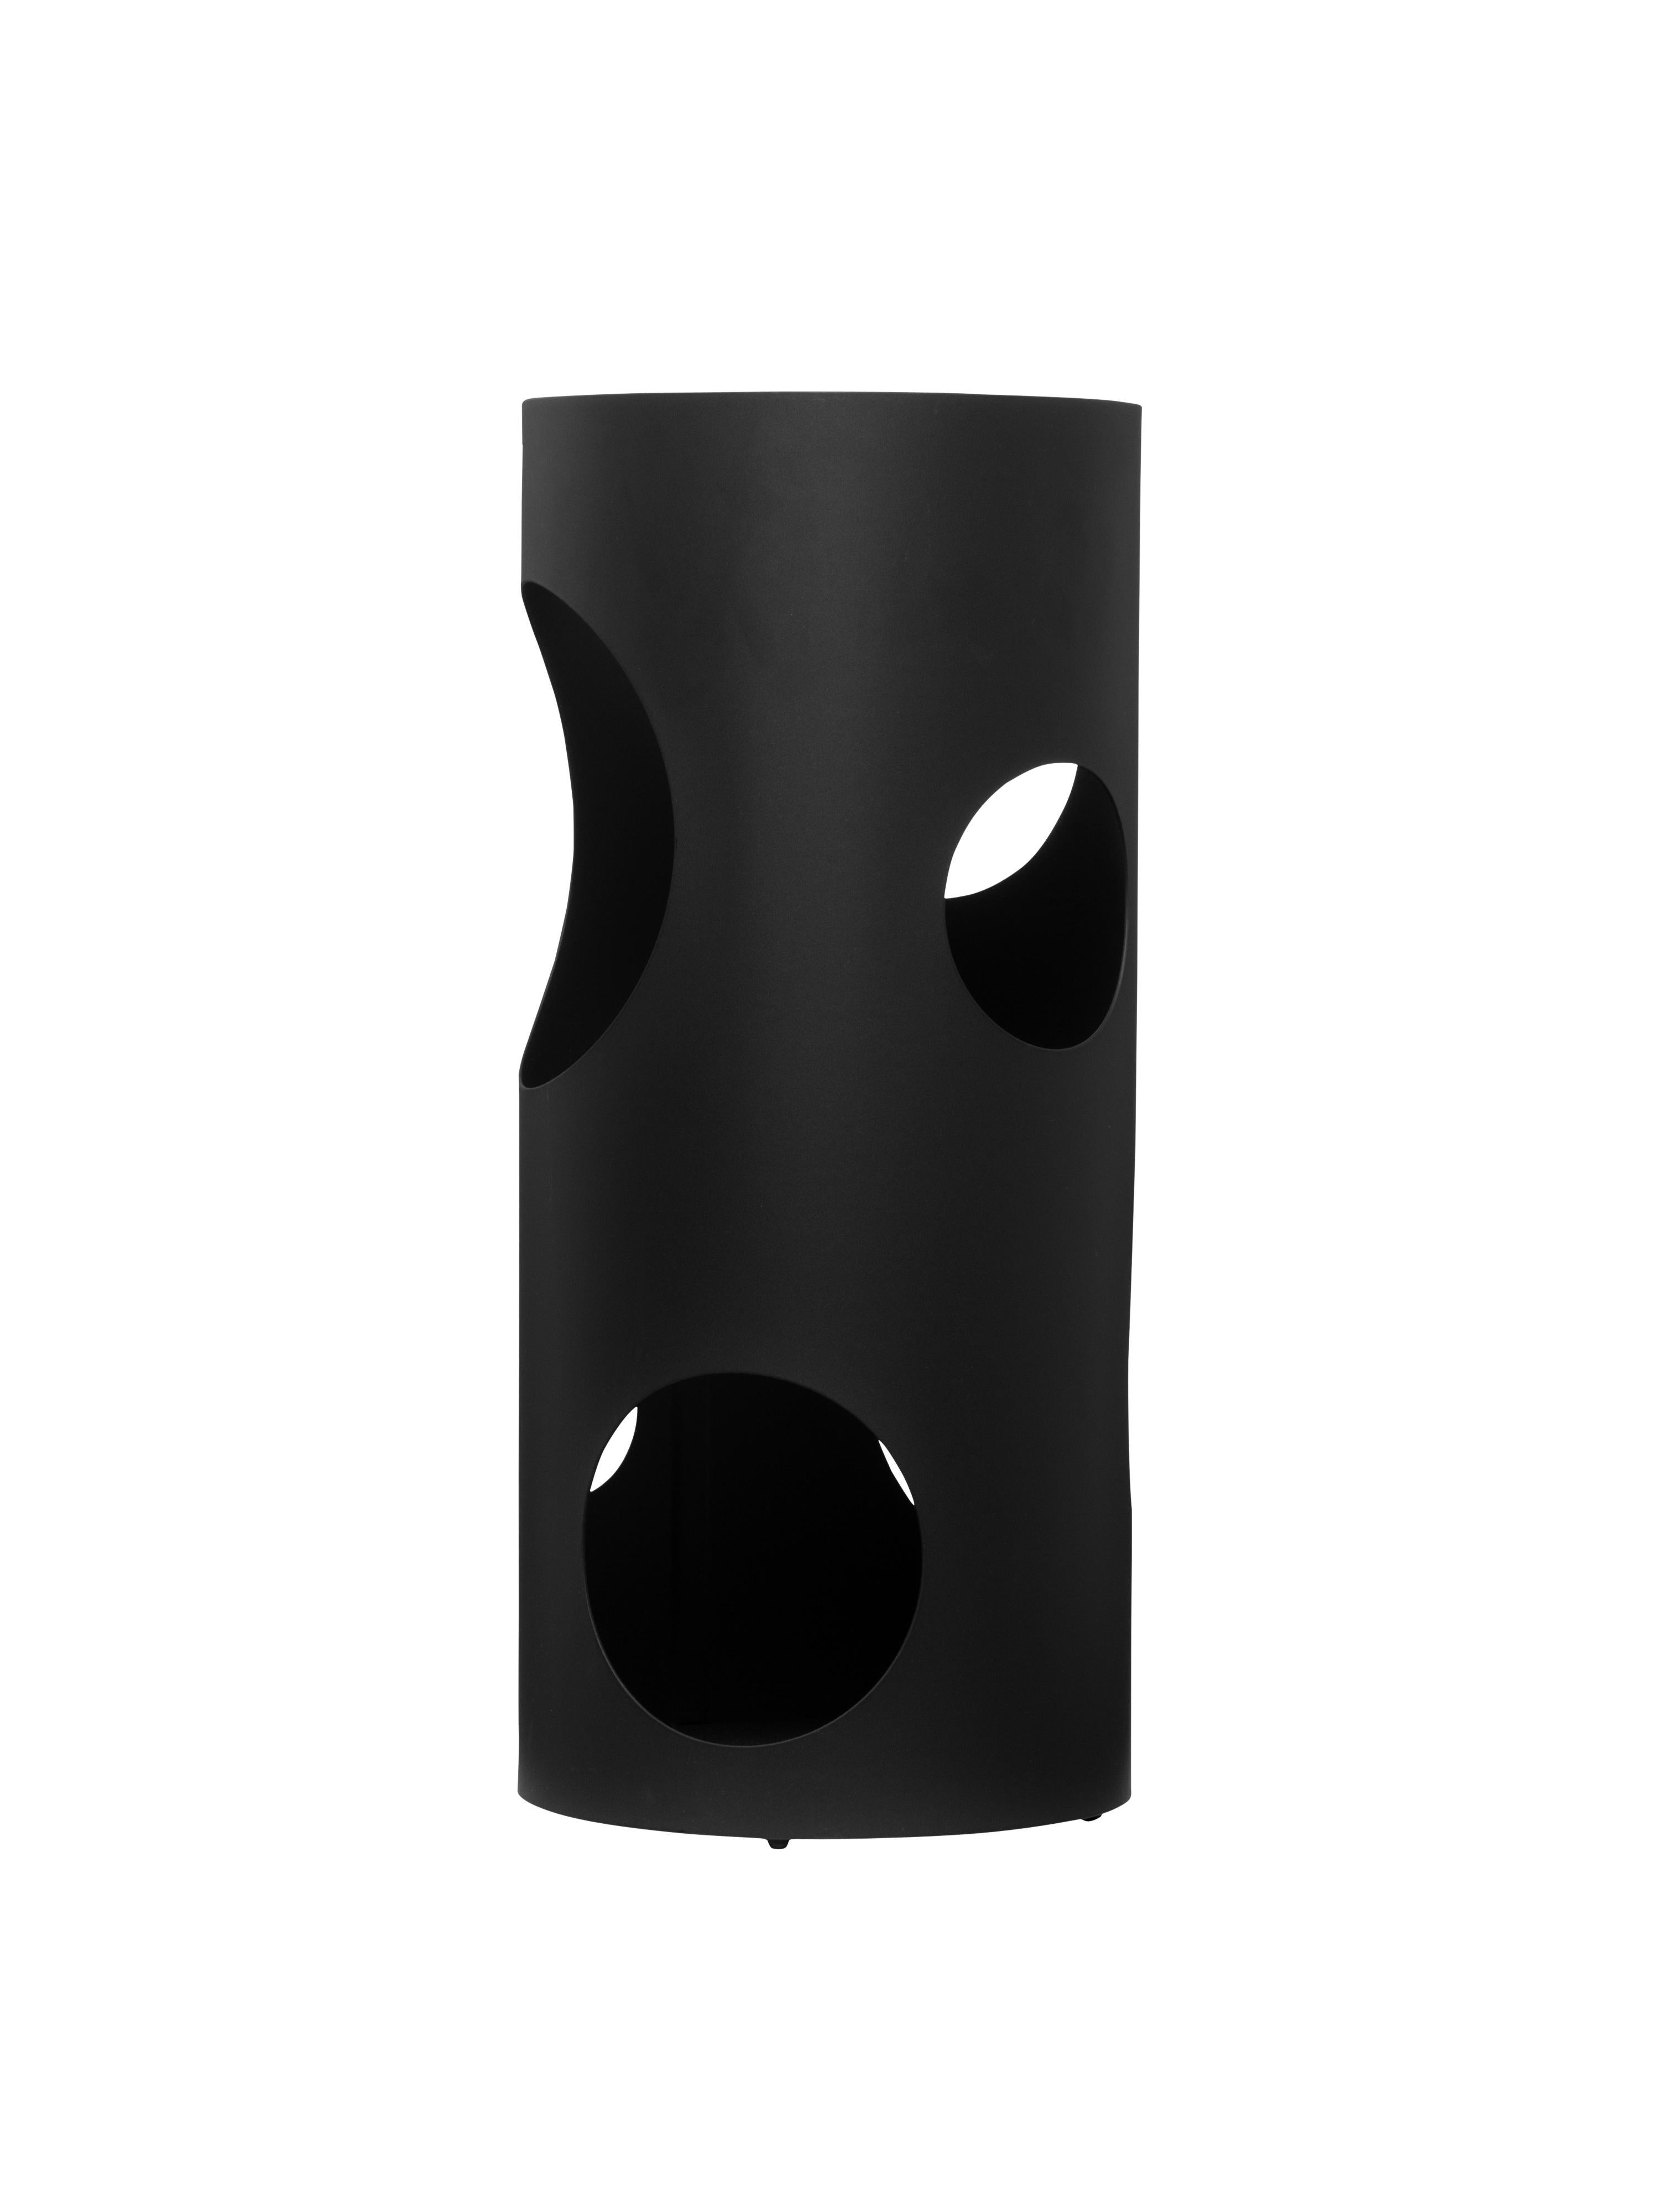 Holed metal cylinder, powder coated in Black with orange HOME magnet inside
By Virgil Abloh
Dimensions: 22 W x 50 H
This item is only available to be purchased and shipped to the United States.